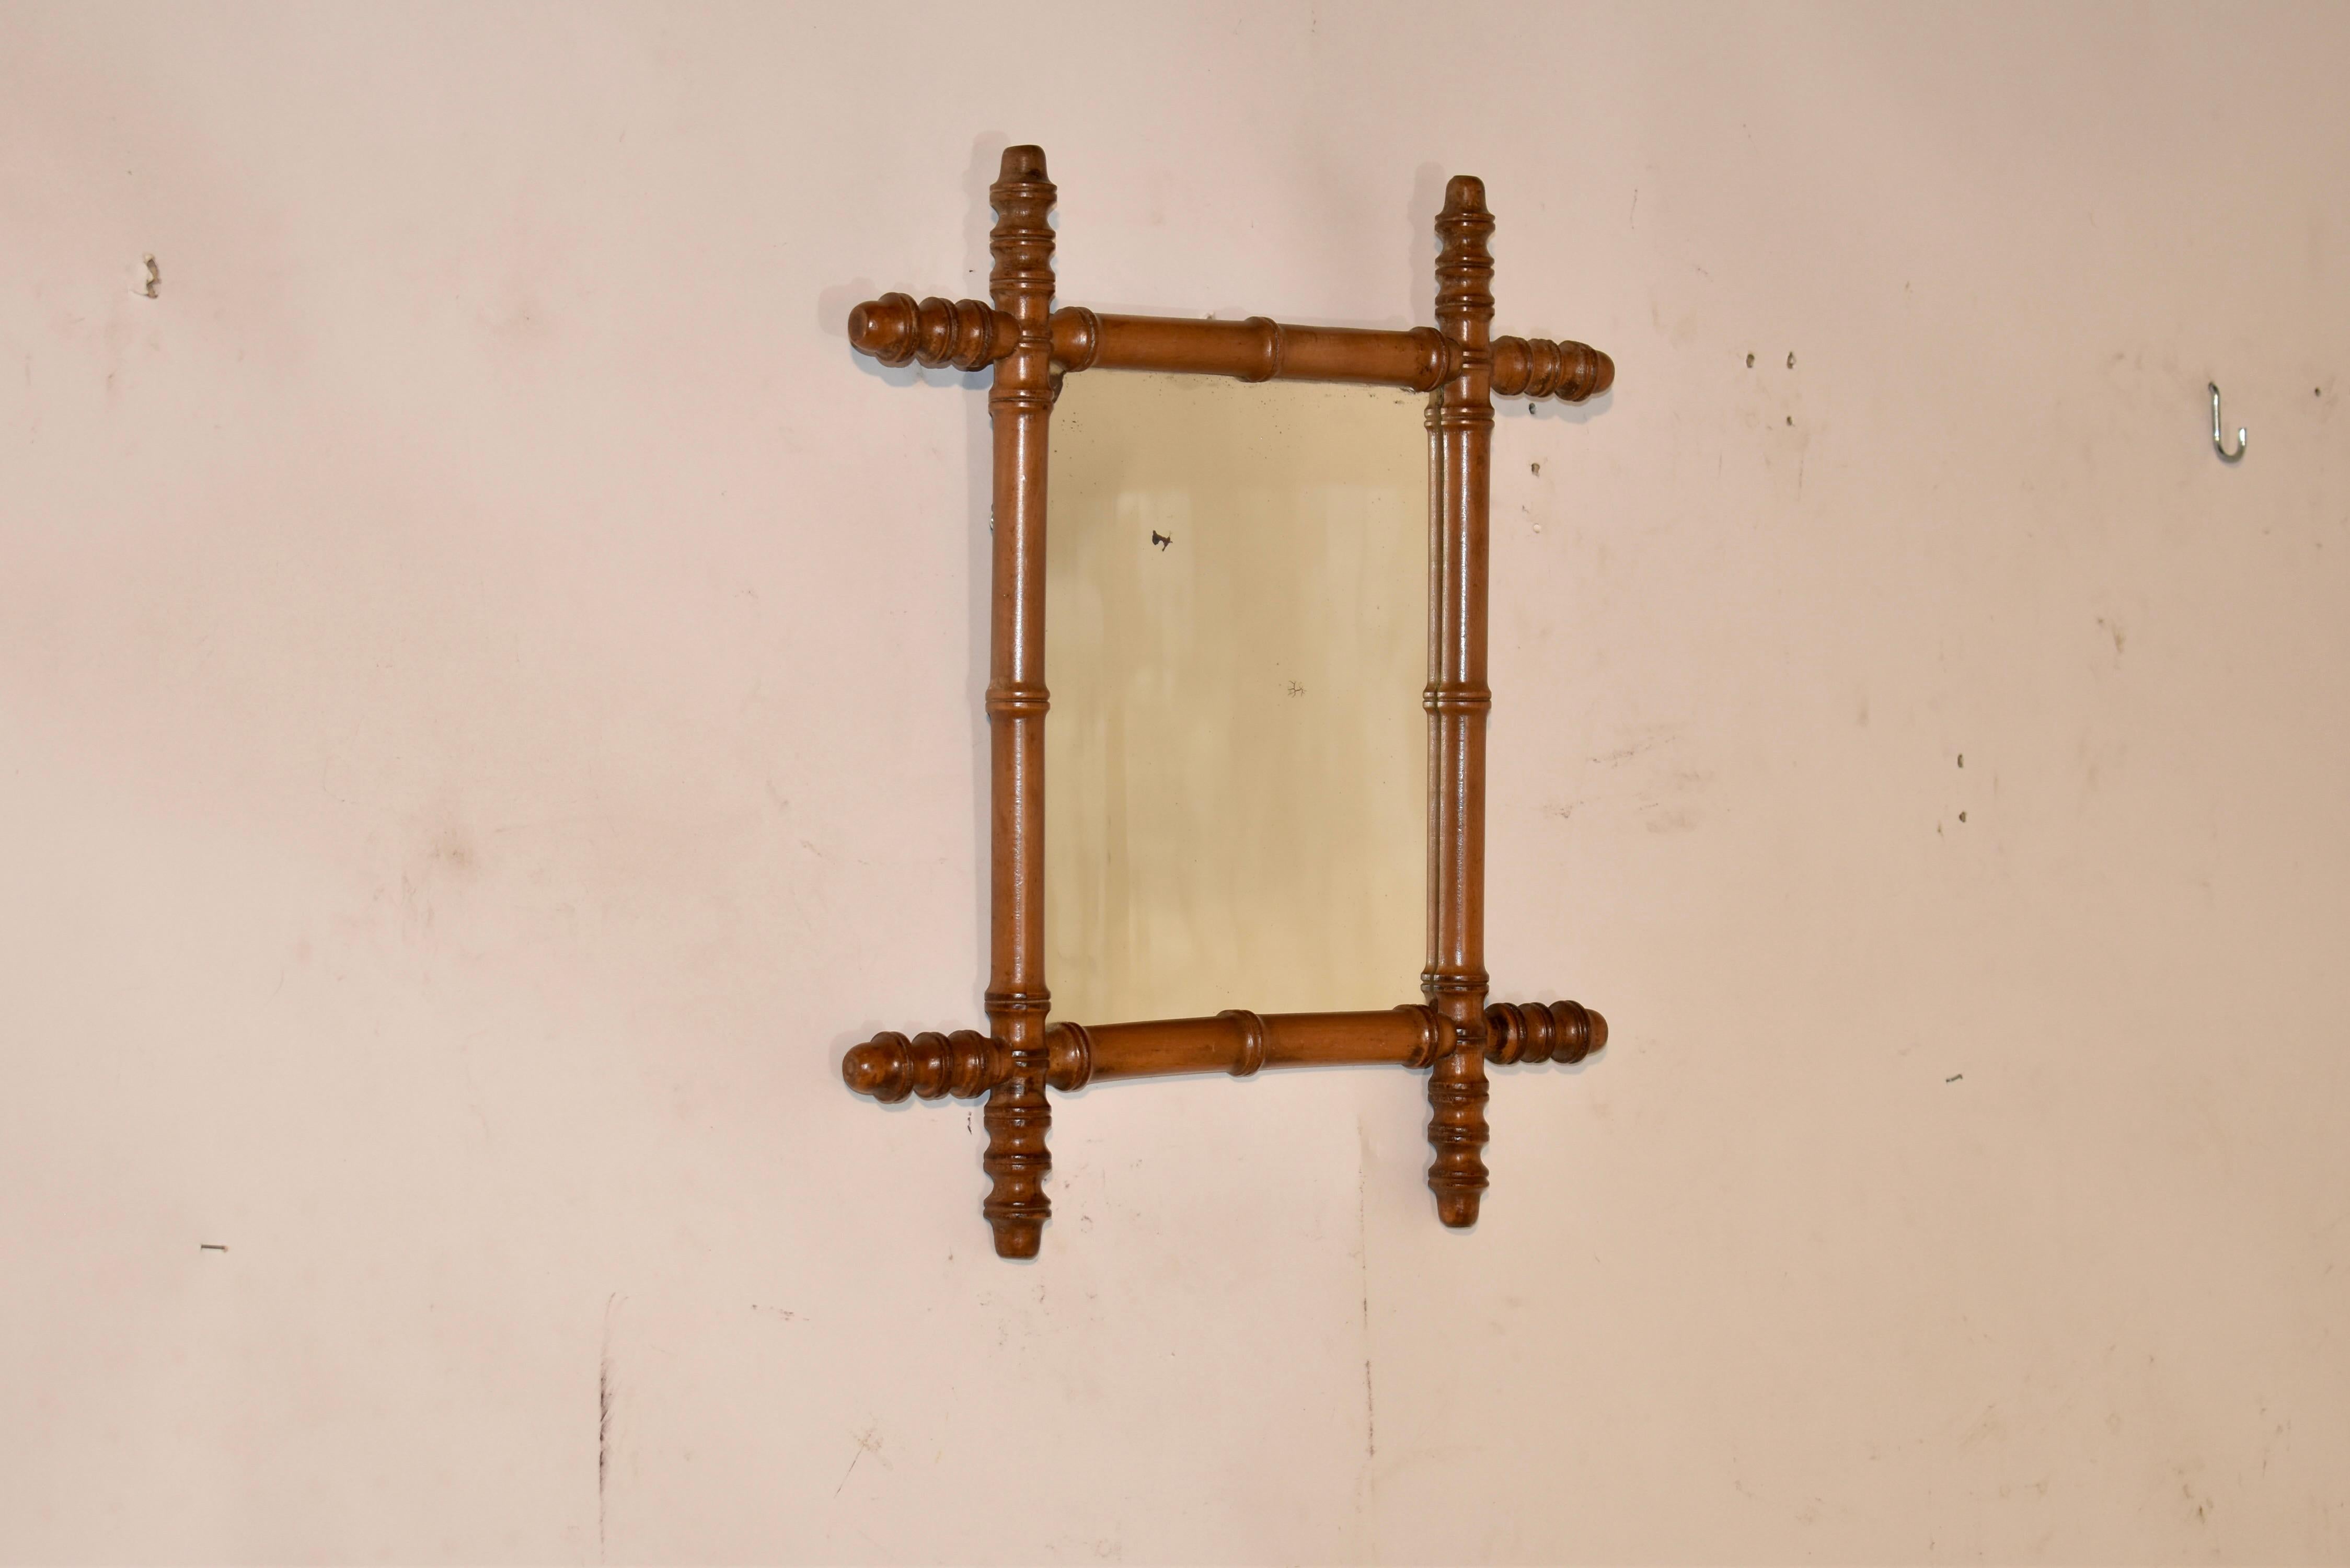 19th century cherry mirror from France. The frame is made from cherry and its hand turned to look like bamboo. The frame is surrounding a mirror, which appears to be original. The mirror is worn, as is normal for a mirror of this age, and has loss